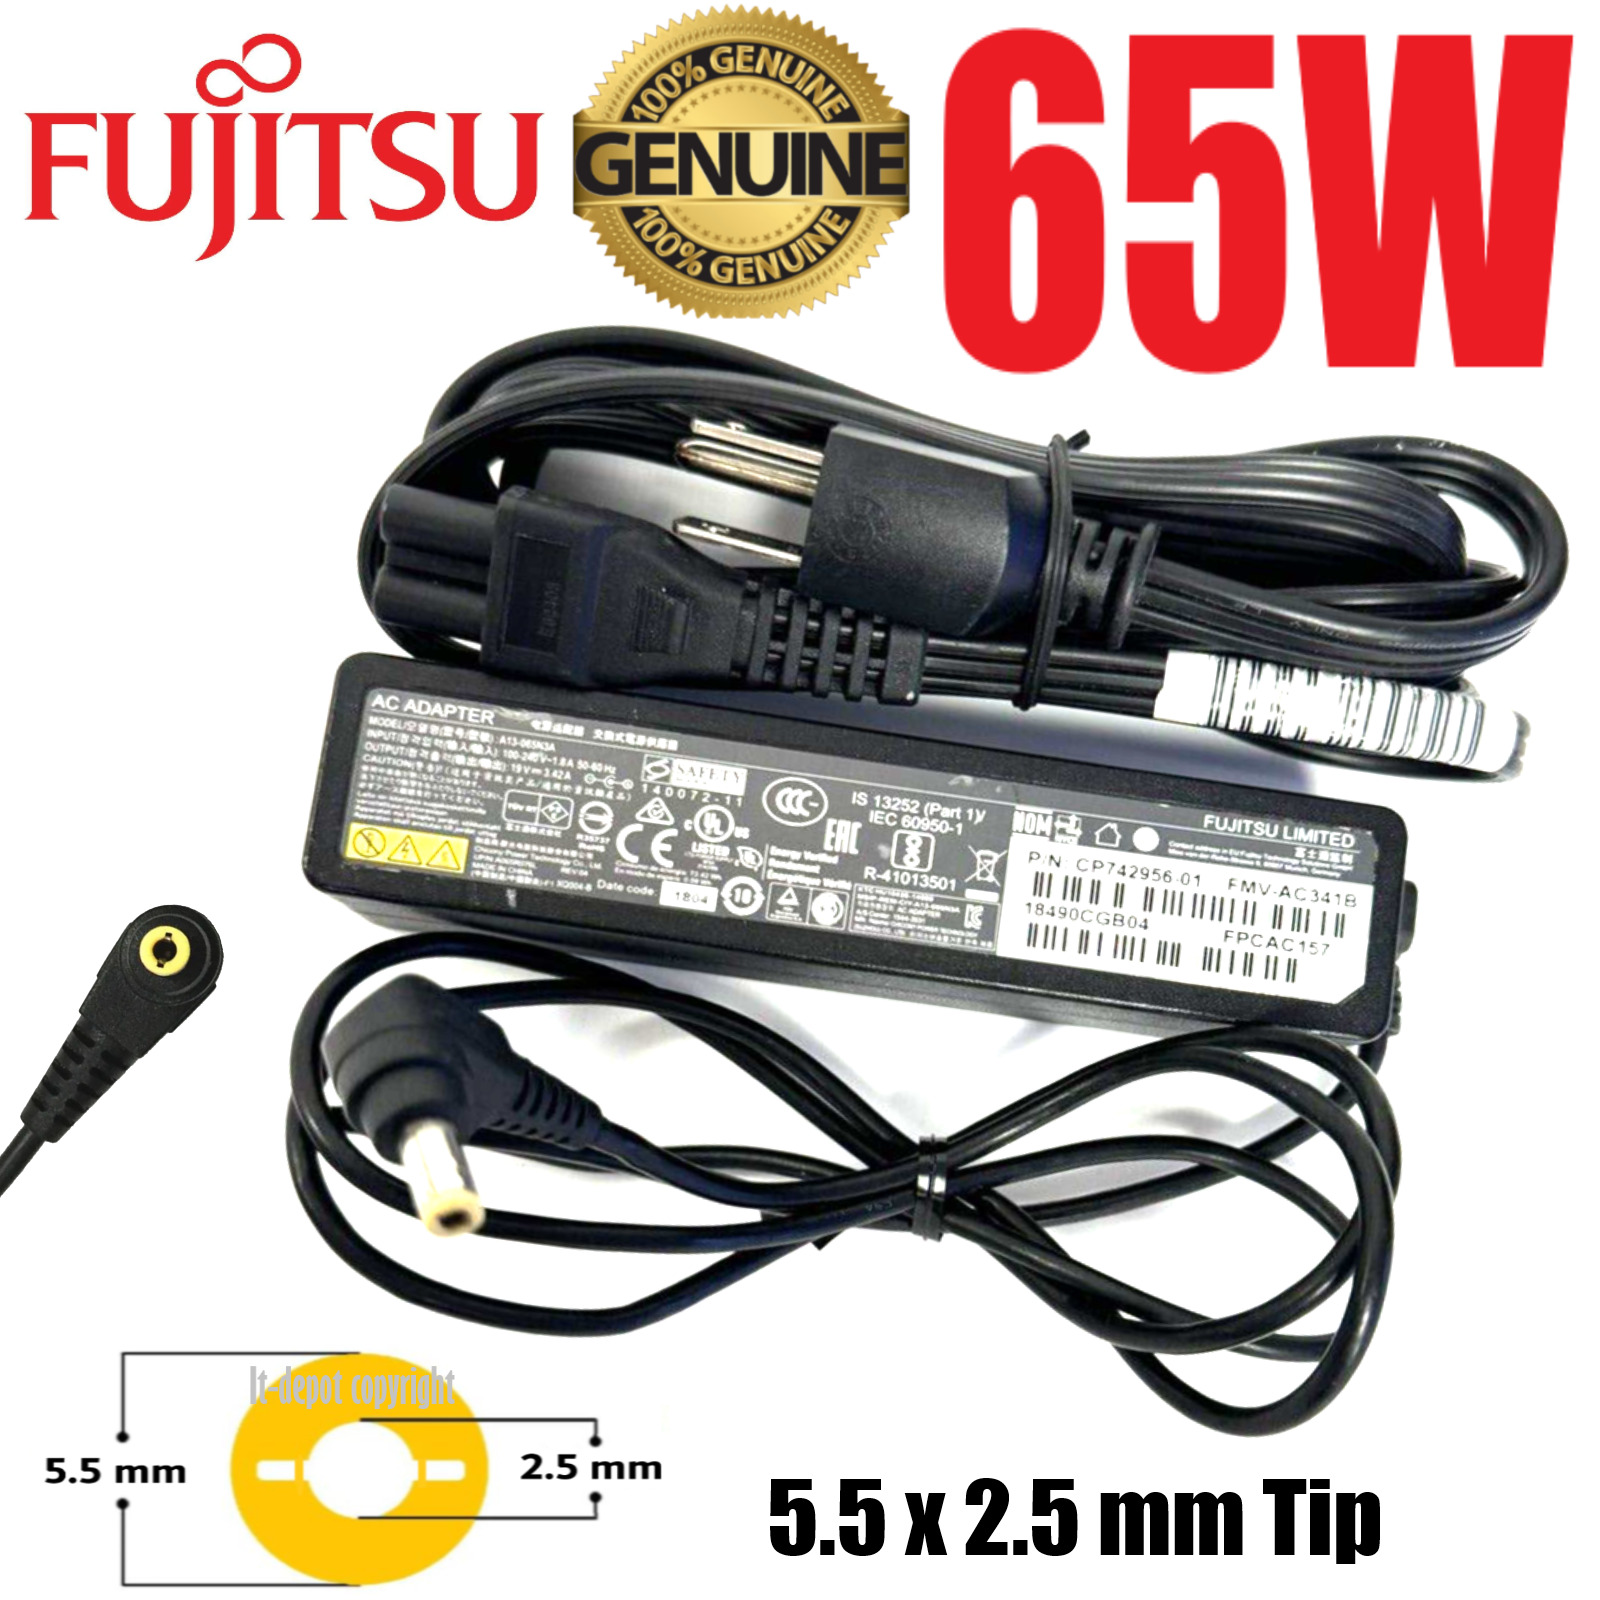 Genuine Fujitsu 65W 5.5x2.5mm Tip 19V 3.42A Laptop AC Adapter Charger A13-065N3A